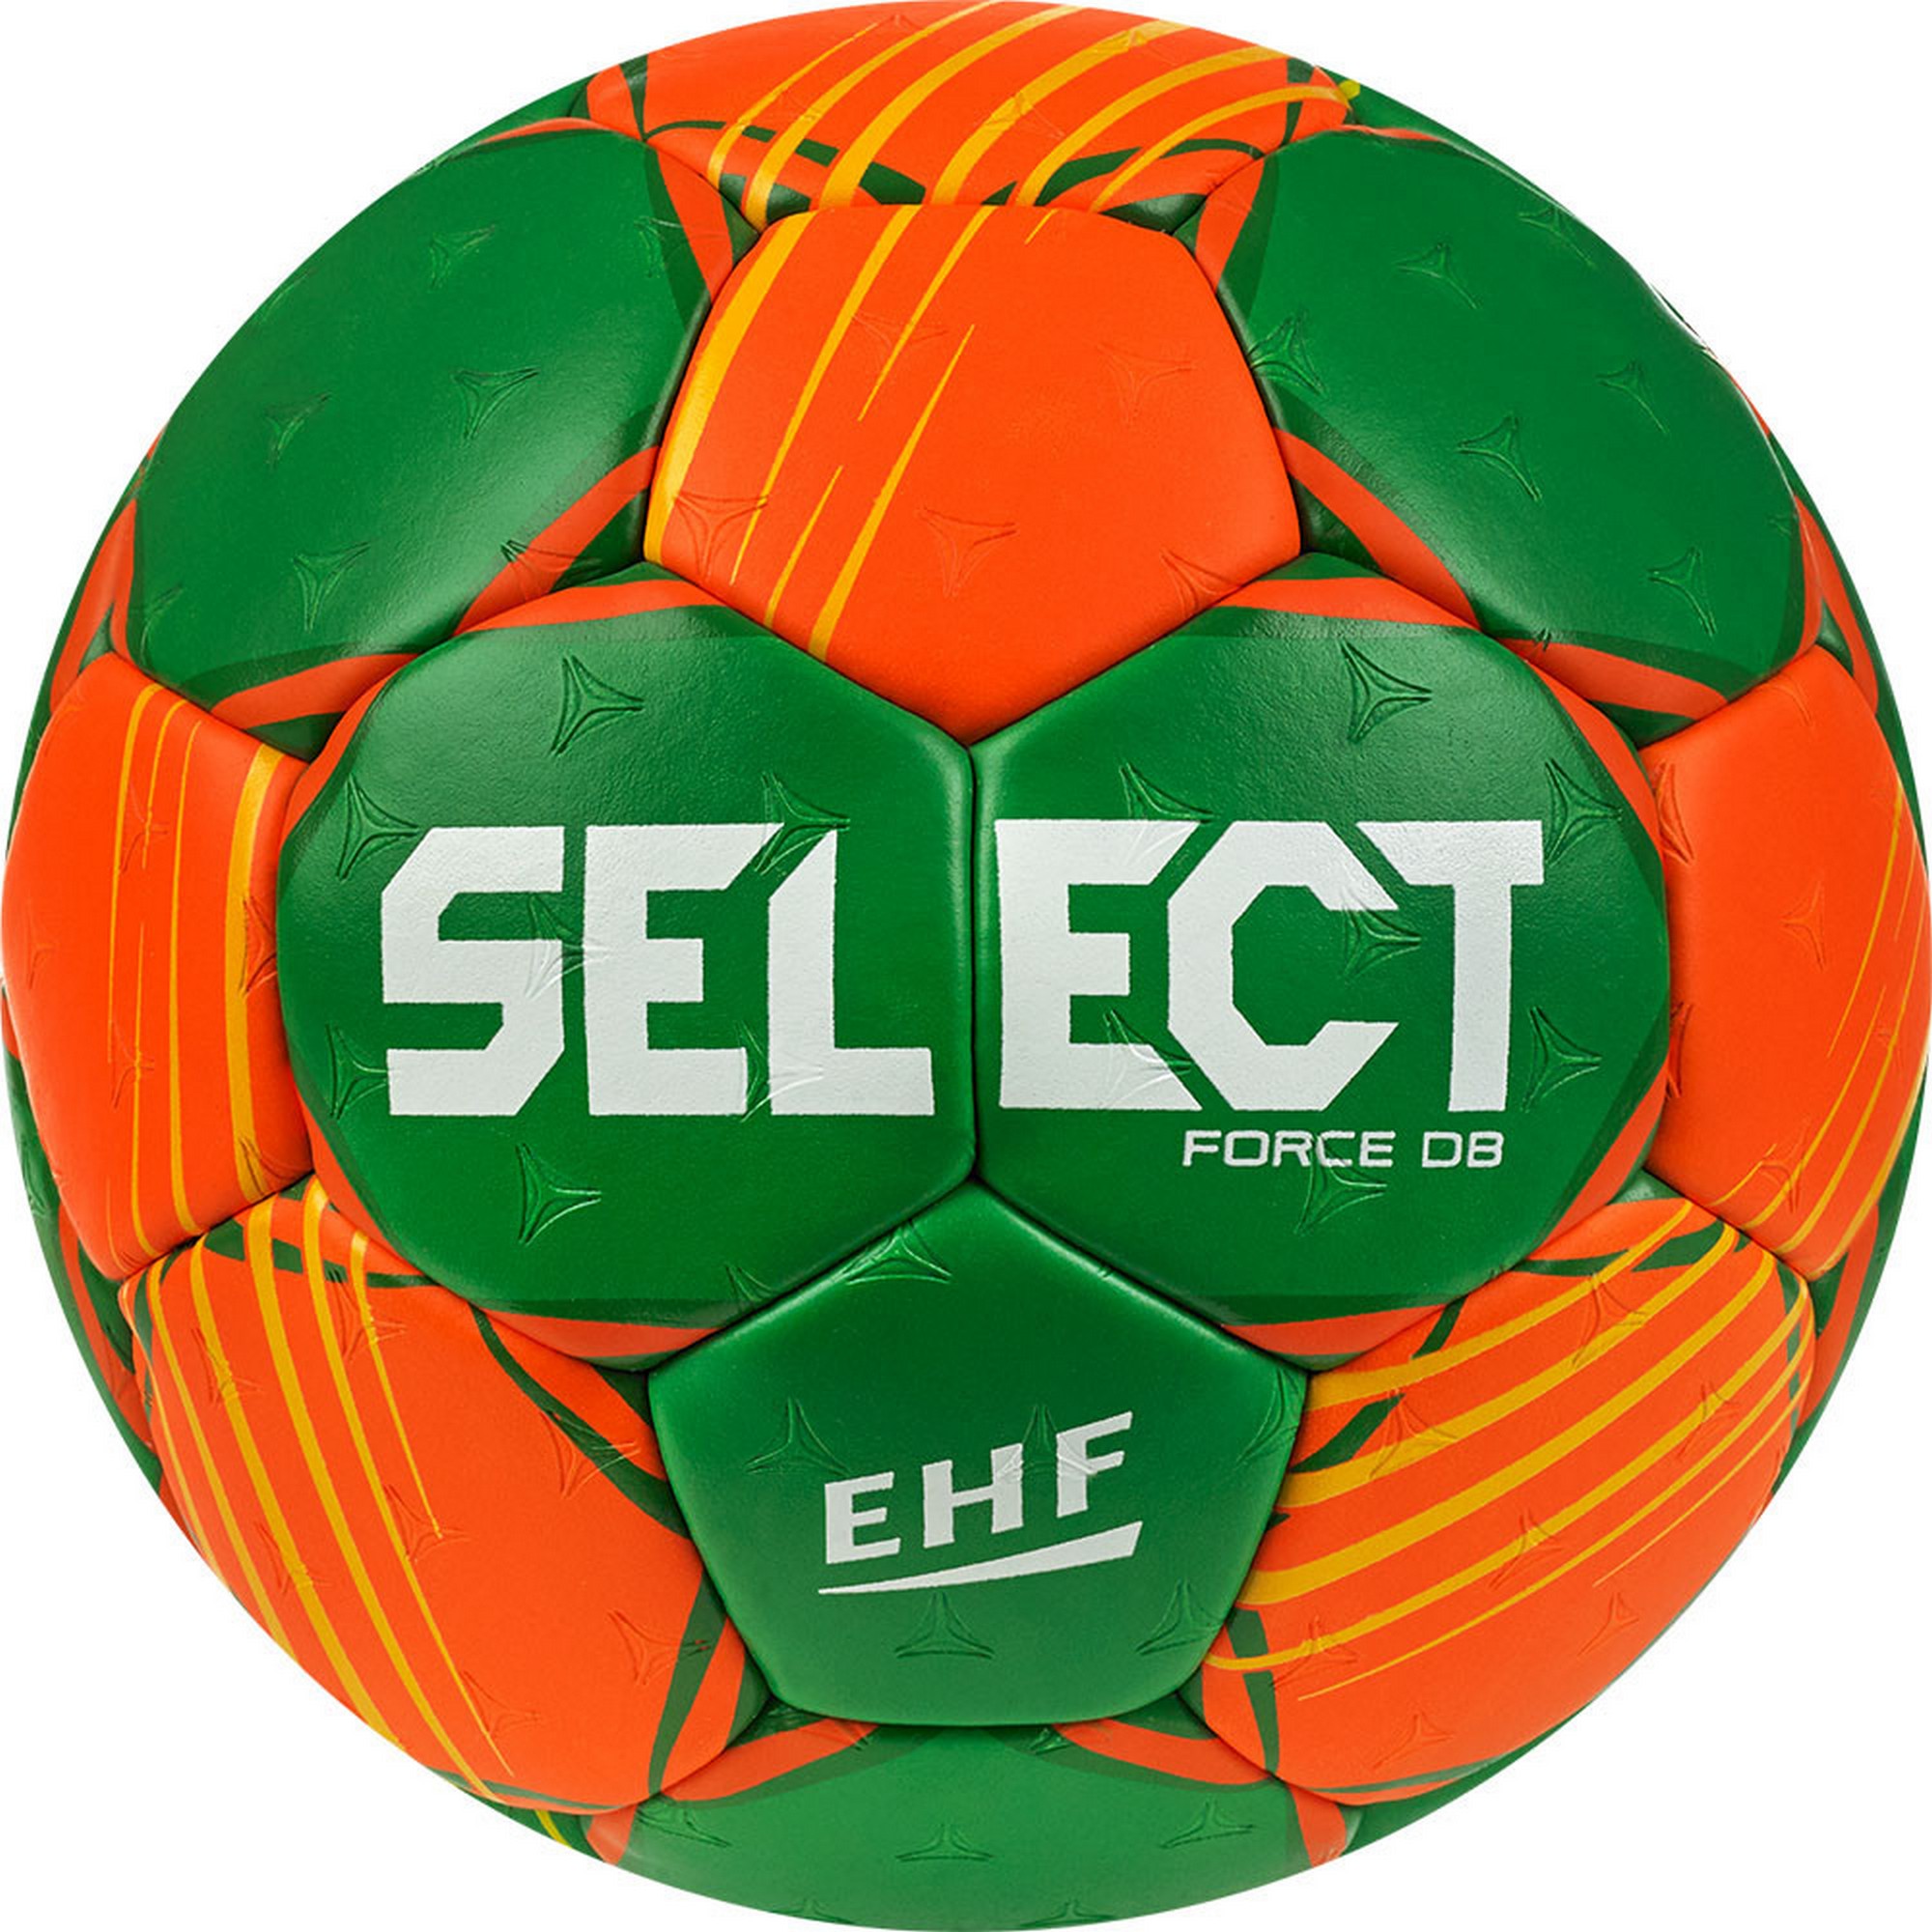   Select FORCE DB 1620850446 EHF Appr, .1